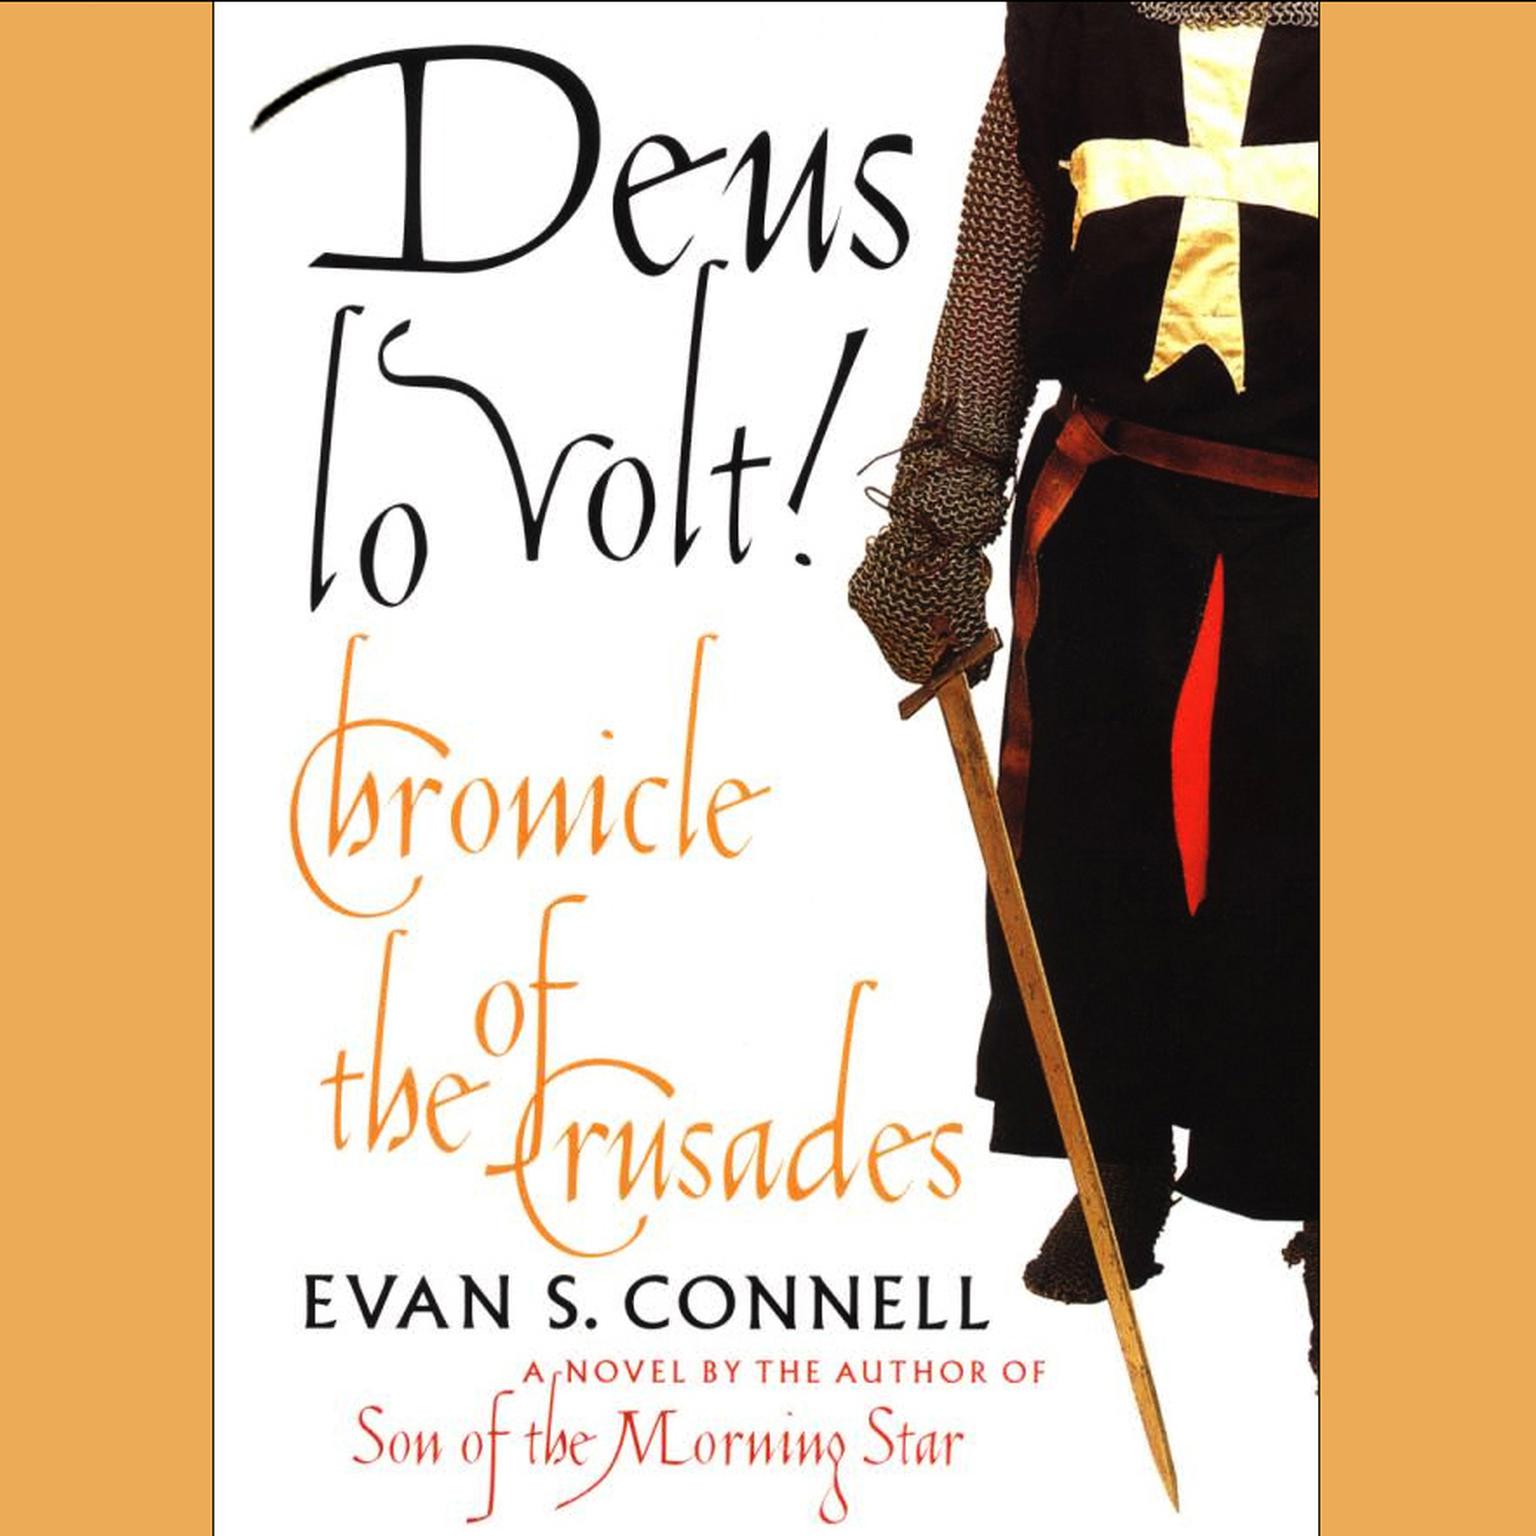 Deus Lo Volt! (Abridged): Chronicle of the Crusades Audiobook, by Evan S. Connell